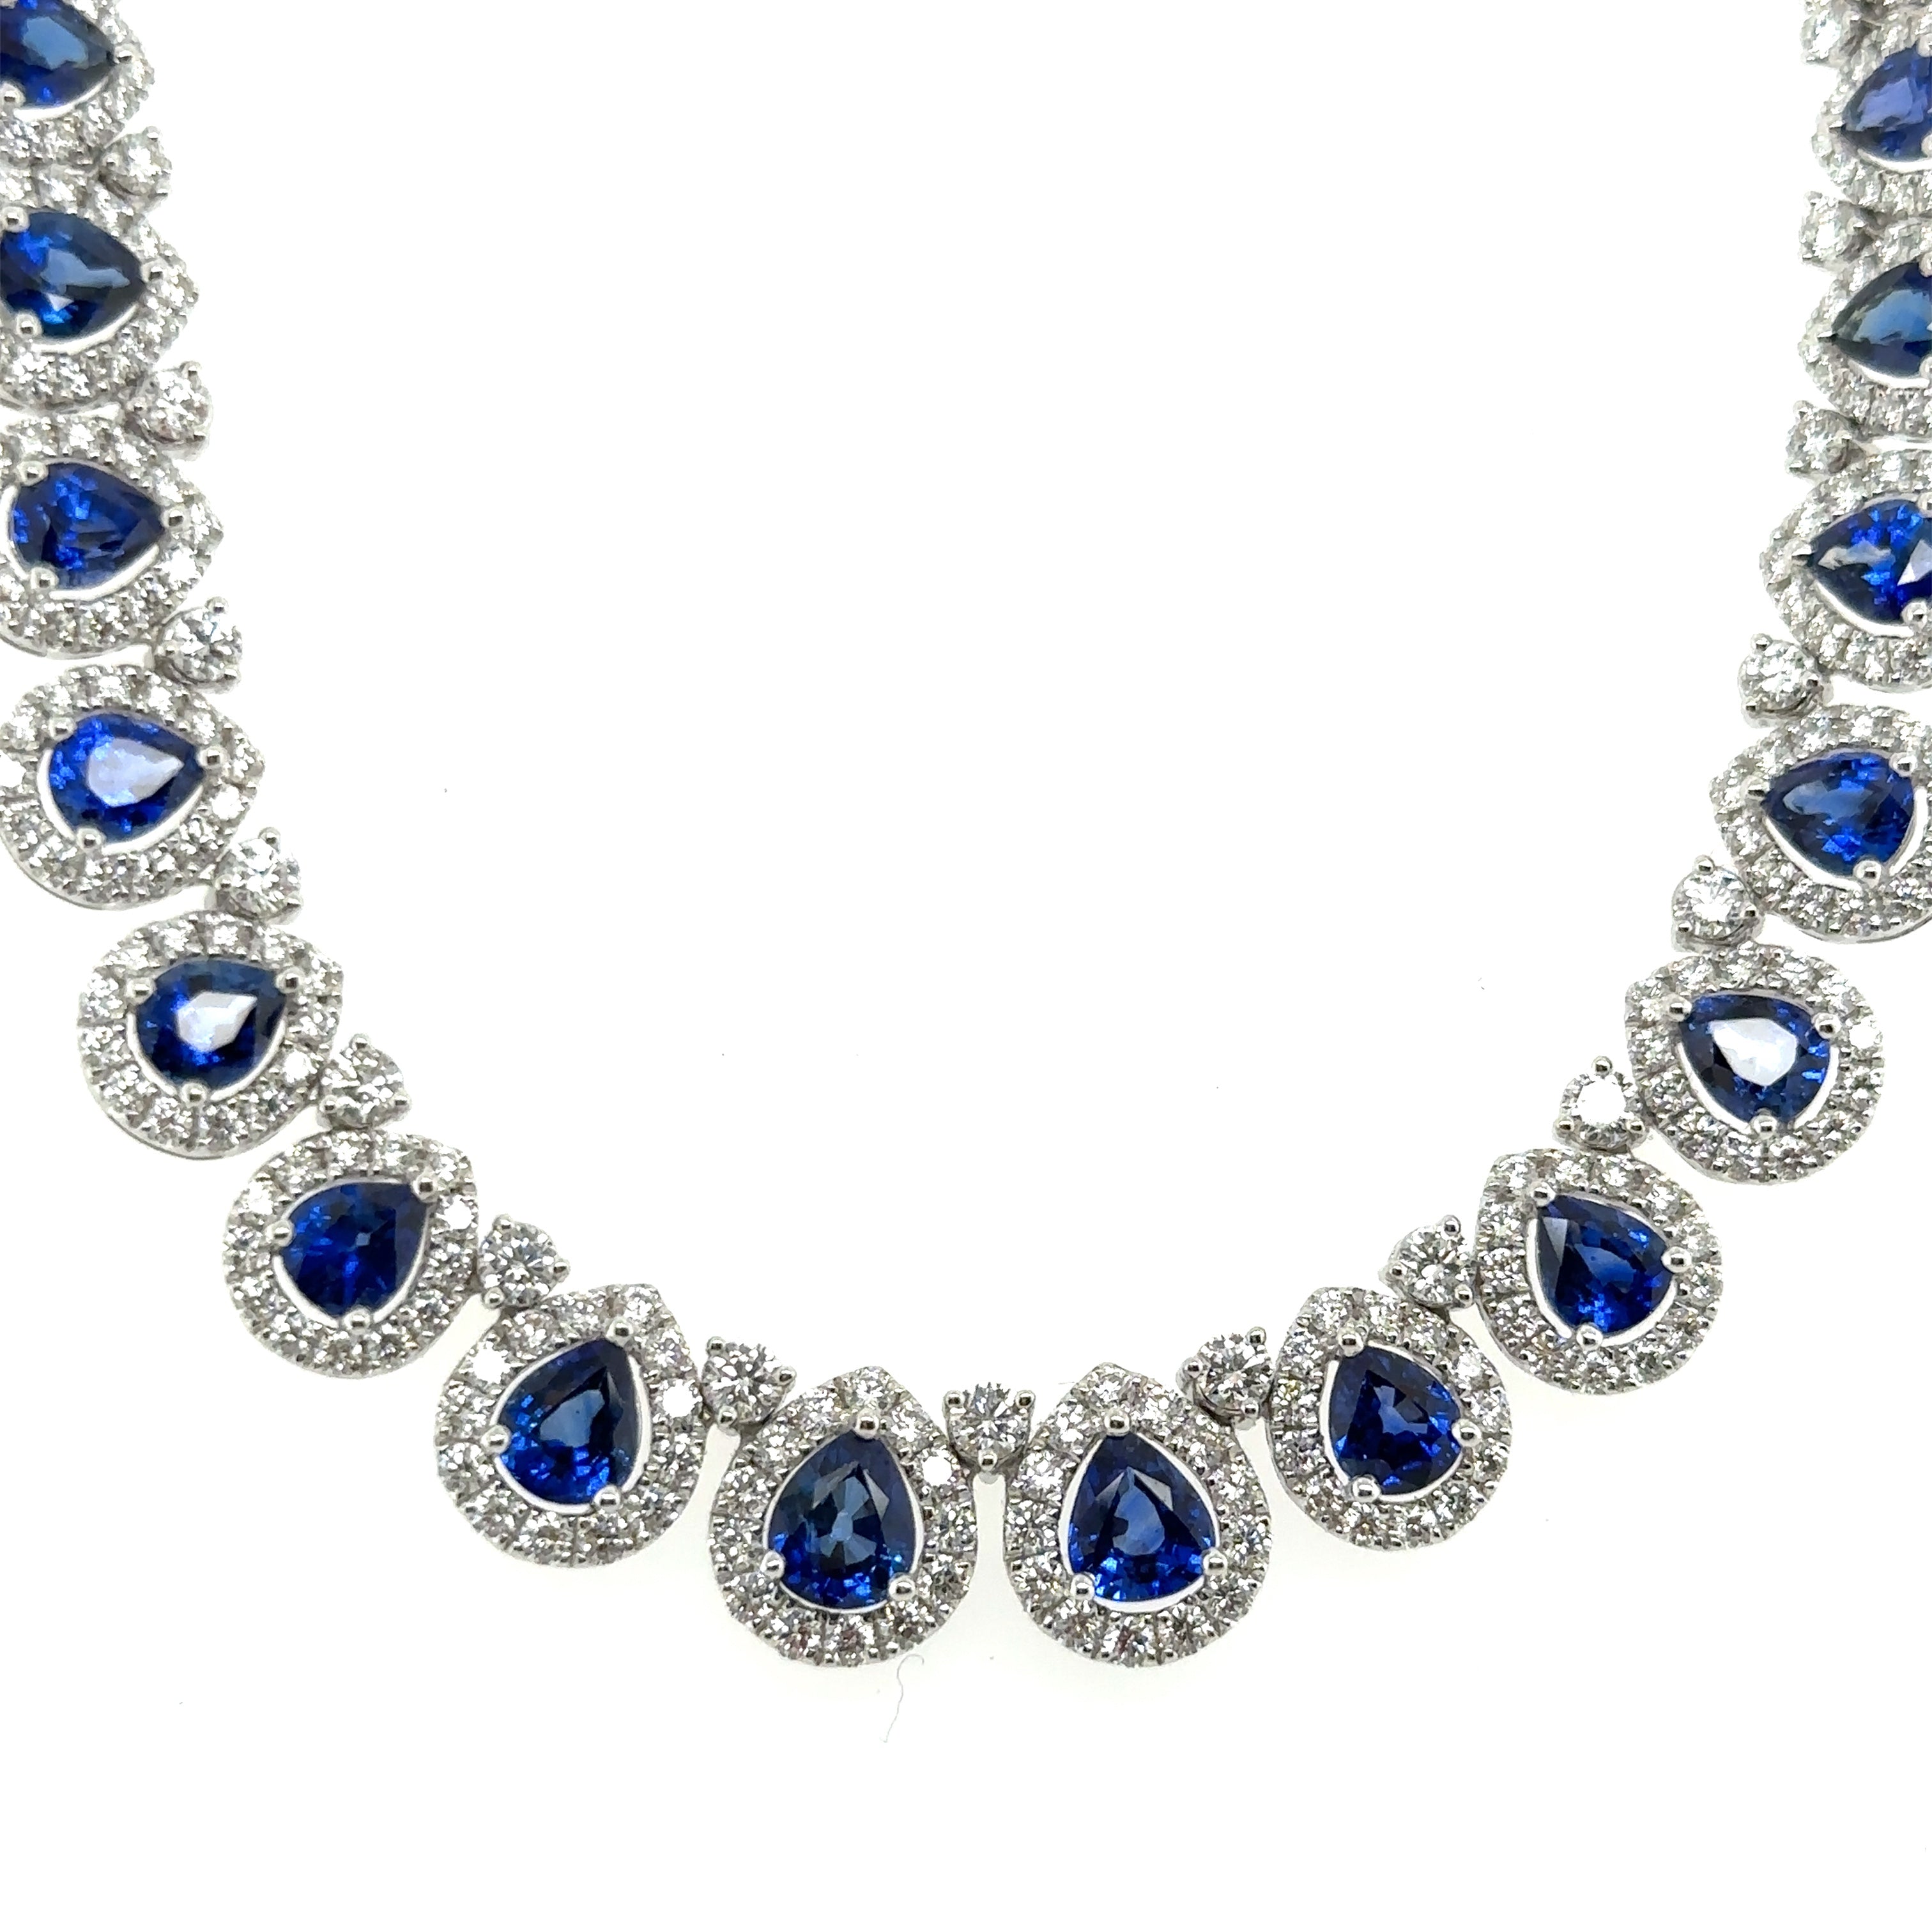 Copy of 27.65carat Pear shape Diamond and Royal Blue Sapphire Statement Necklace